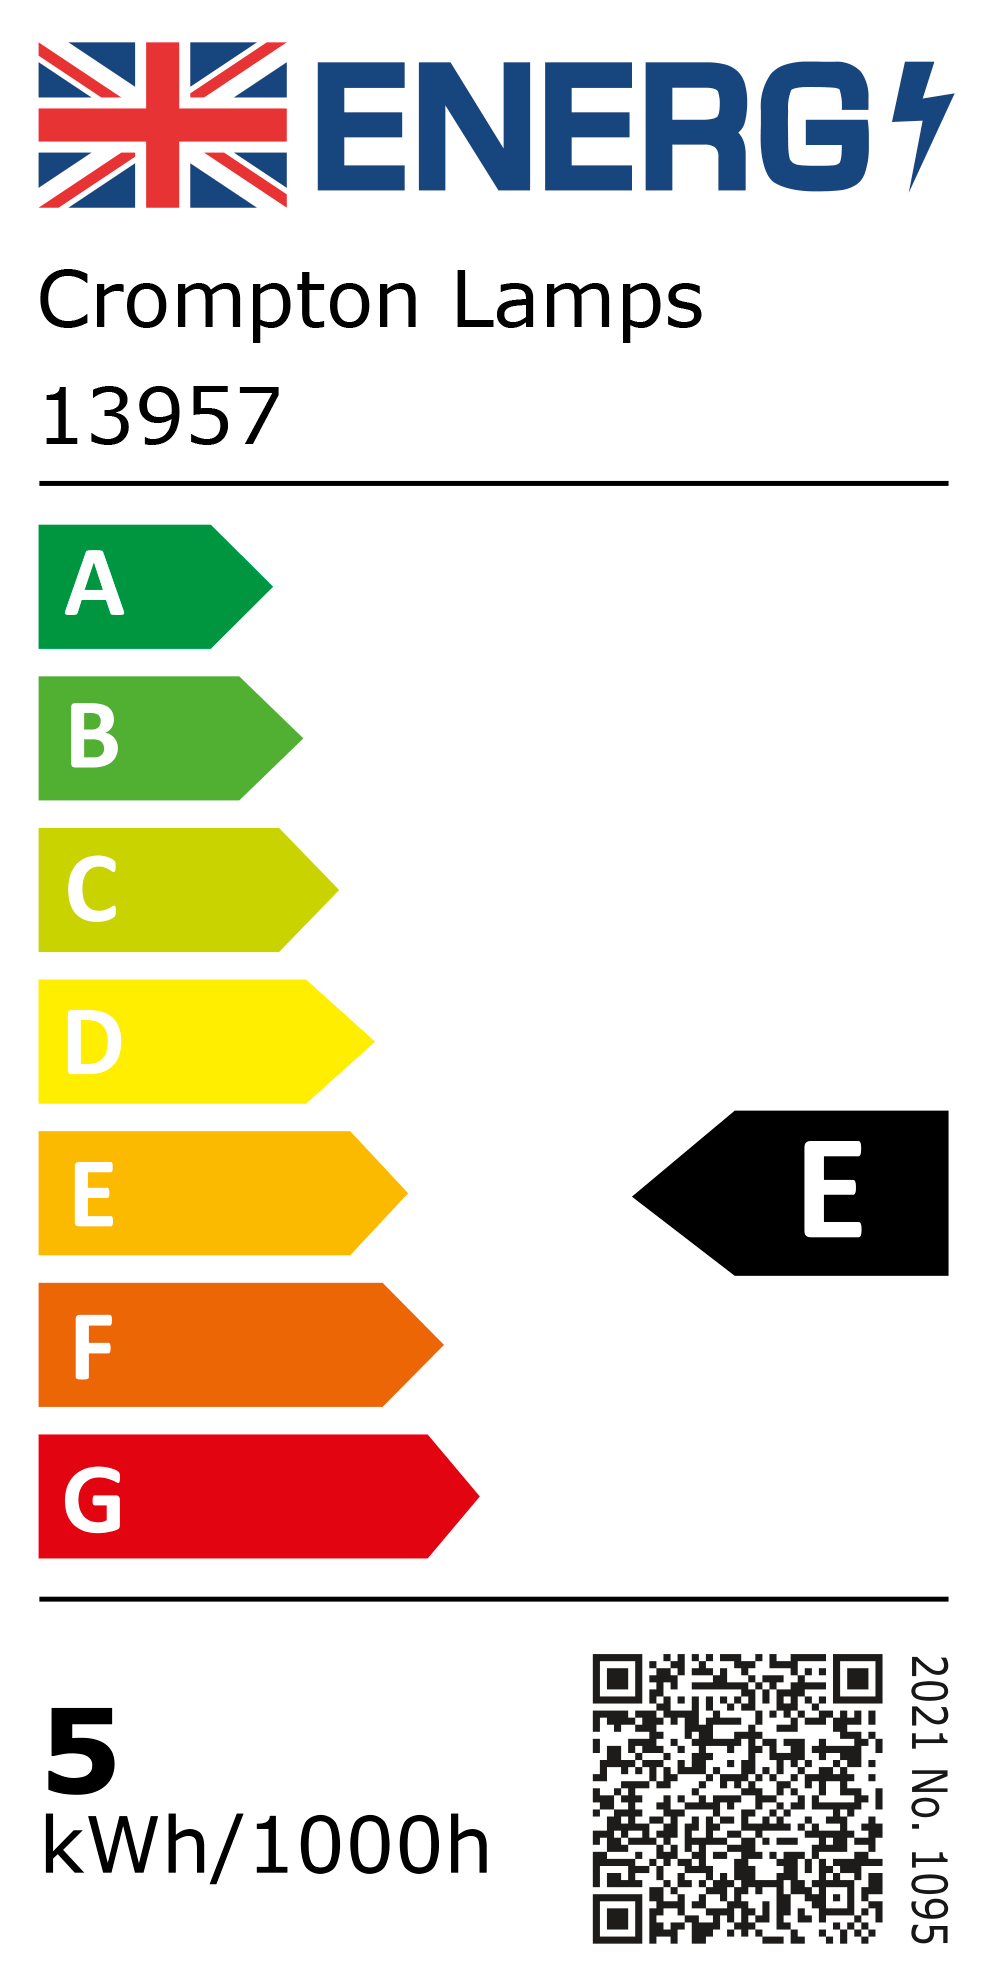 New 2021 Energy Rating Label: Stock Code 13957